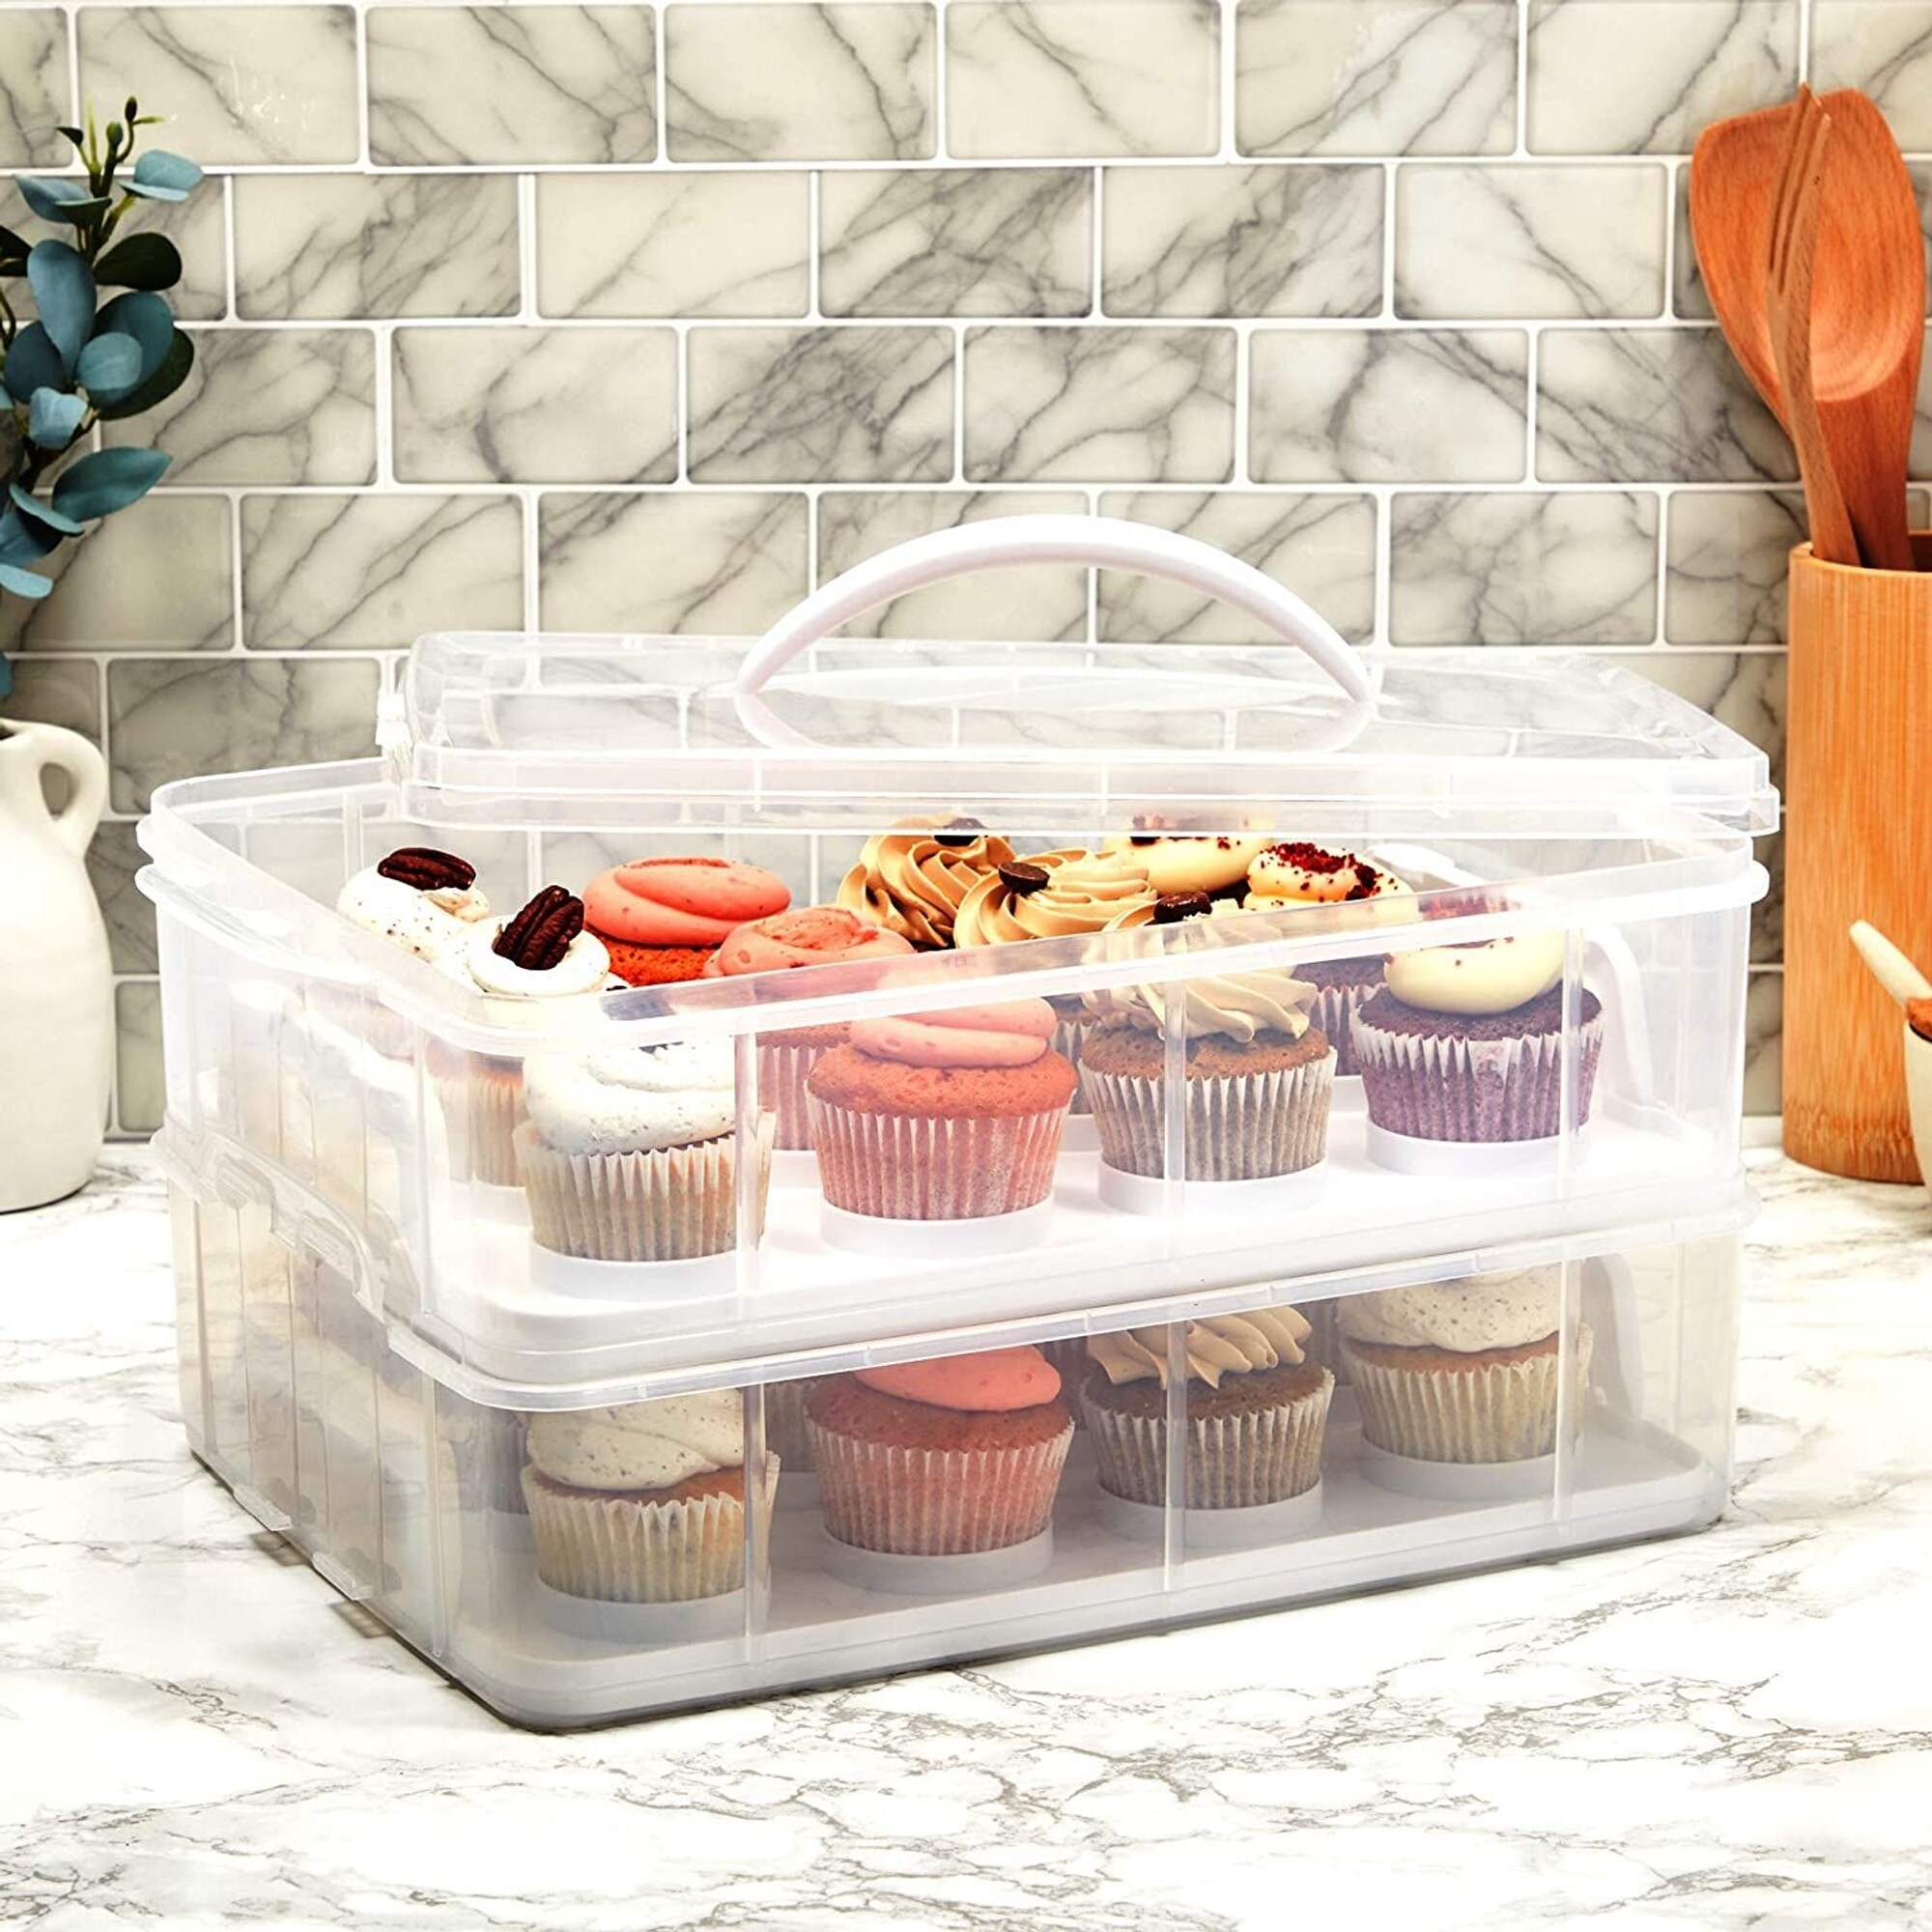 https://ak1.ostkcdn.com/images/products/is/images/direct/8e11483332f79831a3d45b723d948ca20d0a655c/2-Tier-Cupcake-Carrier-with-Lid%2C-Holds-24-Cupcakes-%2813.5-x-10.25-x-7.5-In%29.jpg